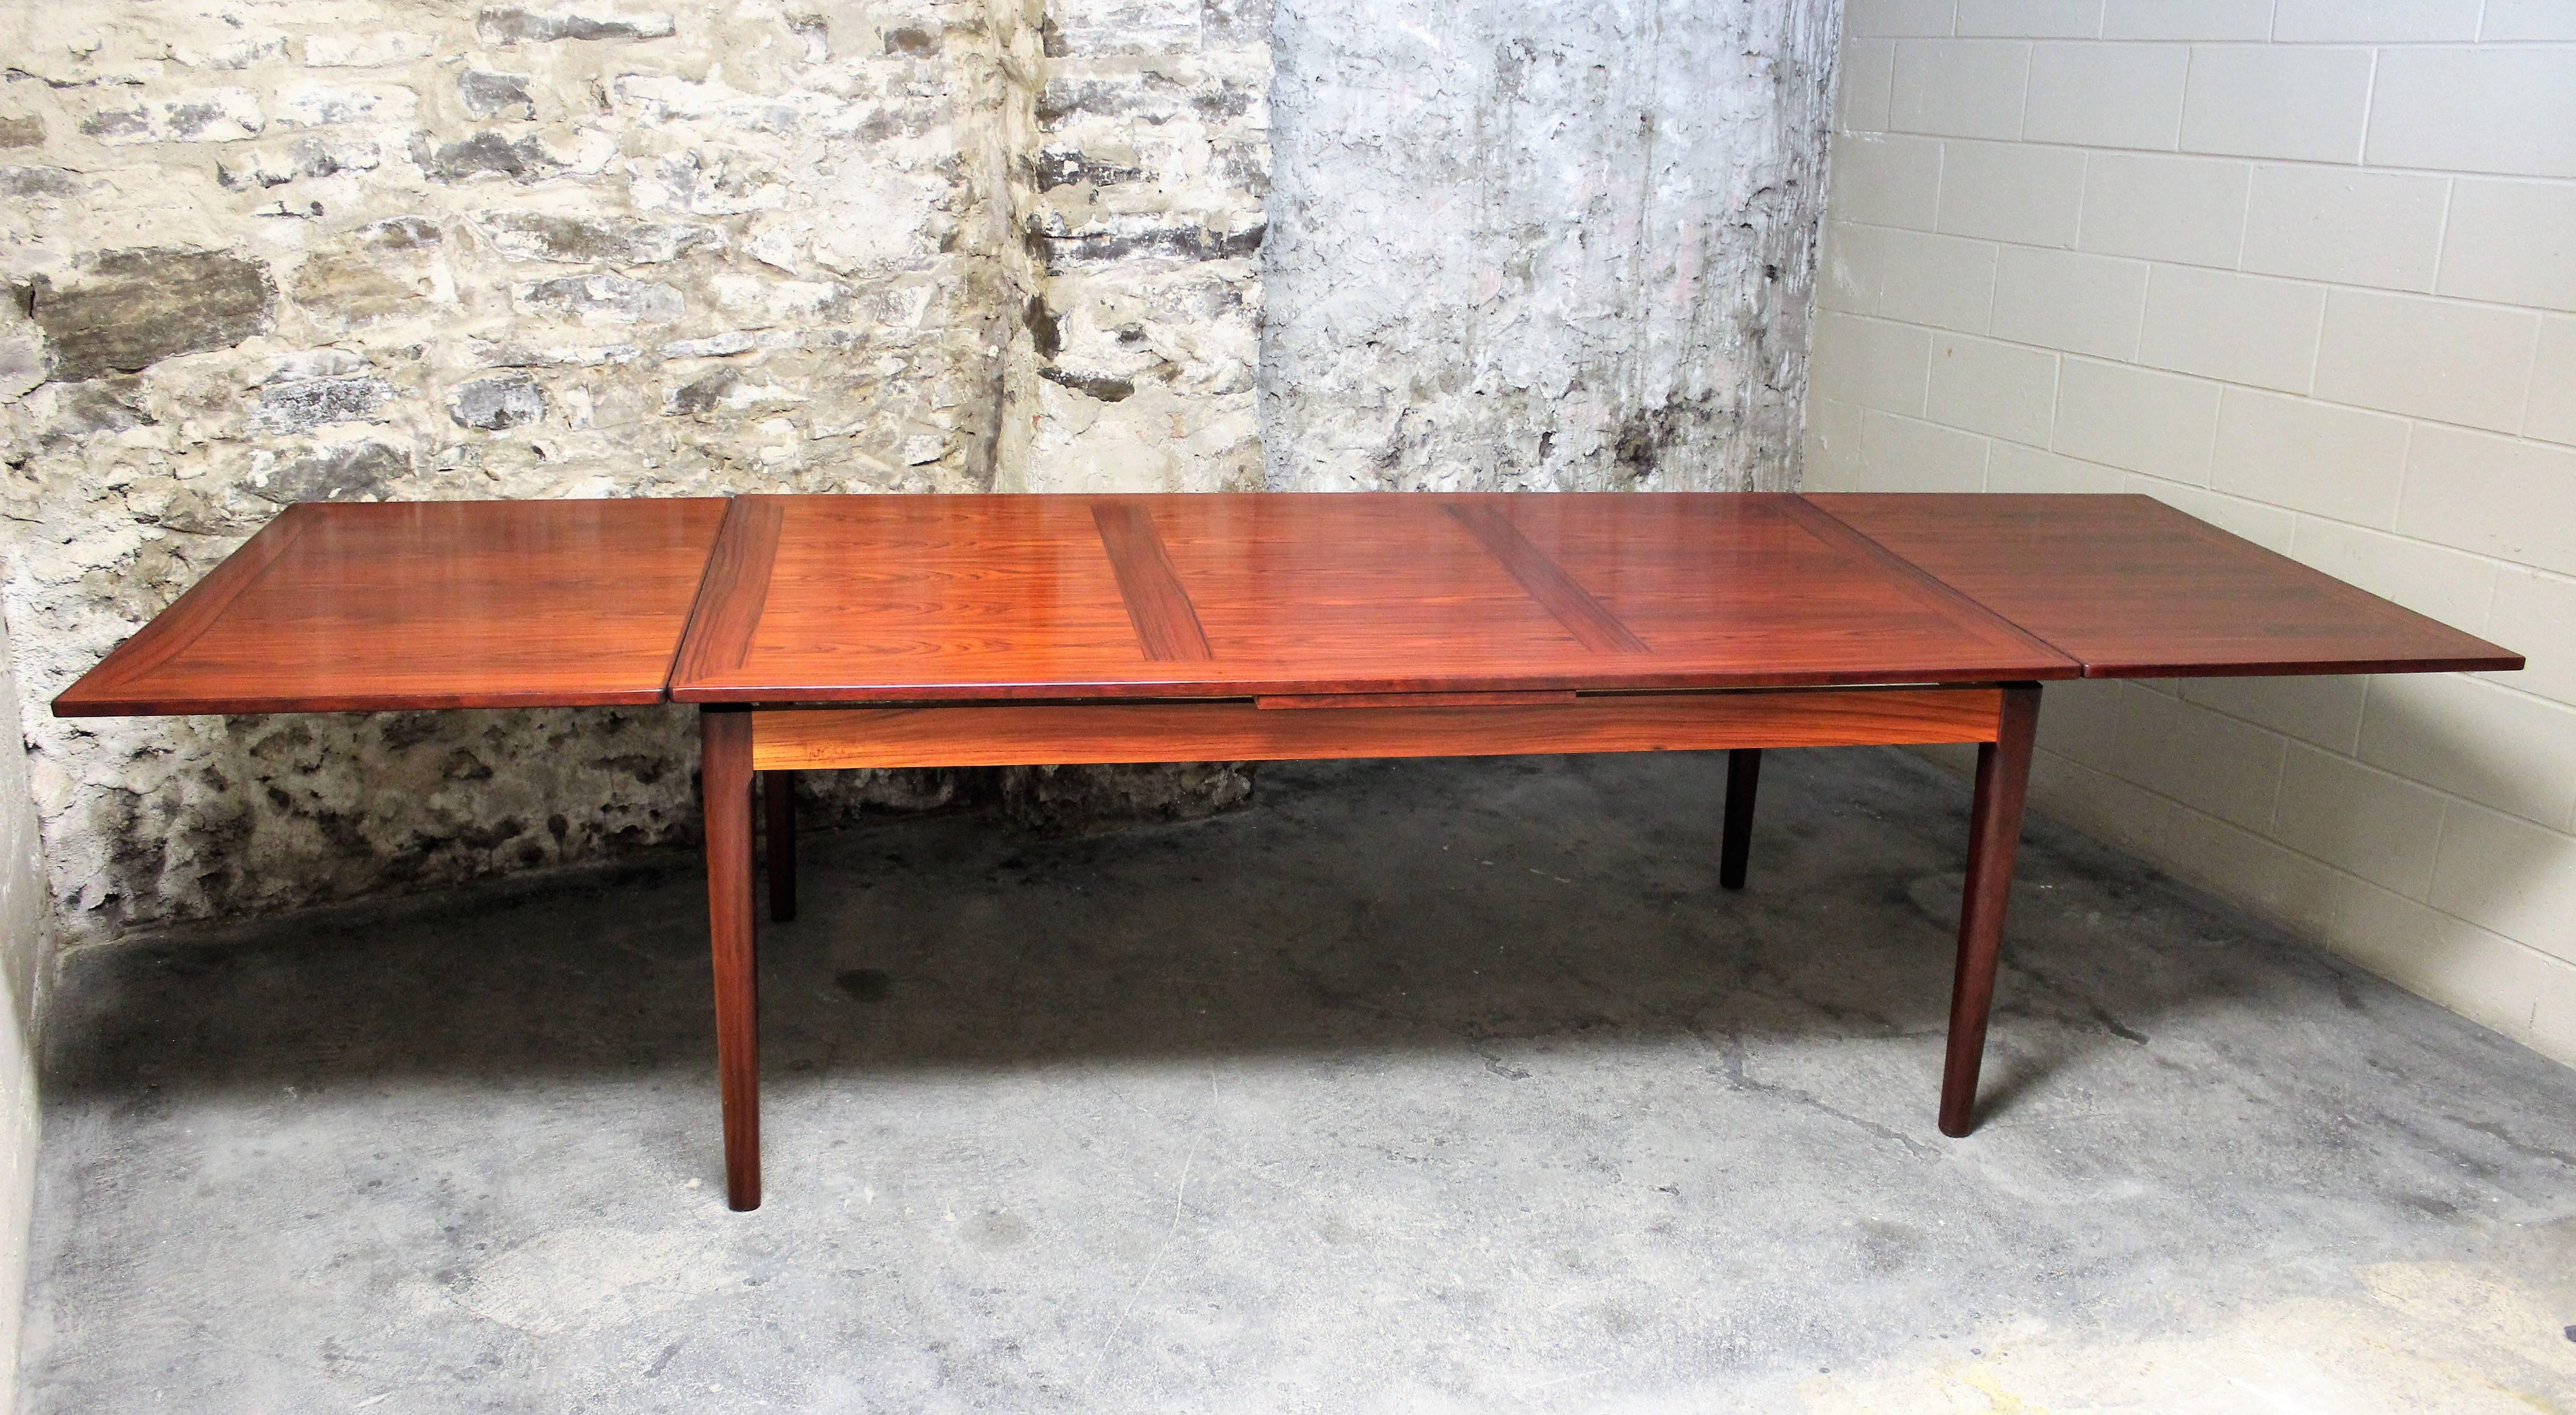 An exquisite Danish modern dining room or conference table by Skovby Mobelfabrik of Denmark. It features stunning Brazilian rosewood grains and two leaves which are stored inside the table. It measures ten and a half feet long with the leaves out